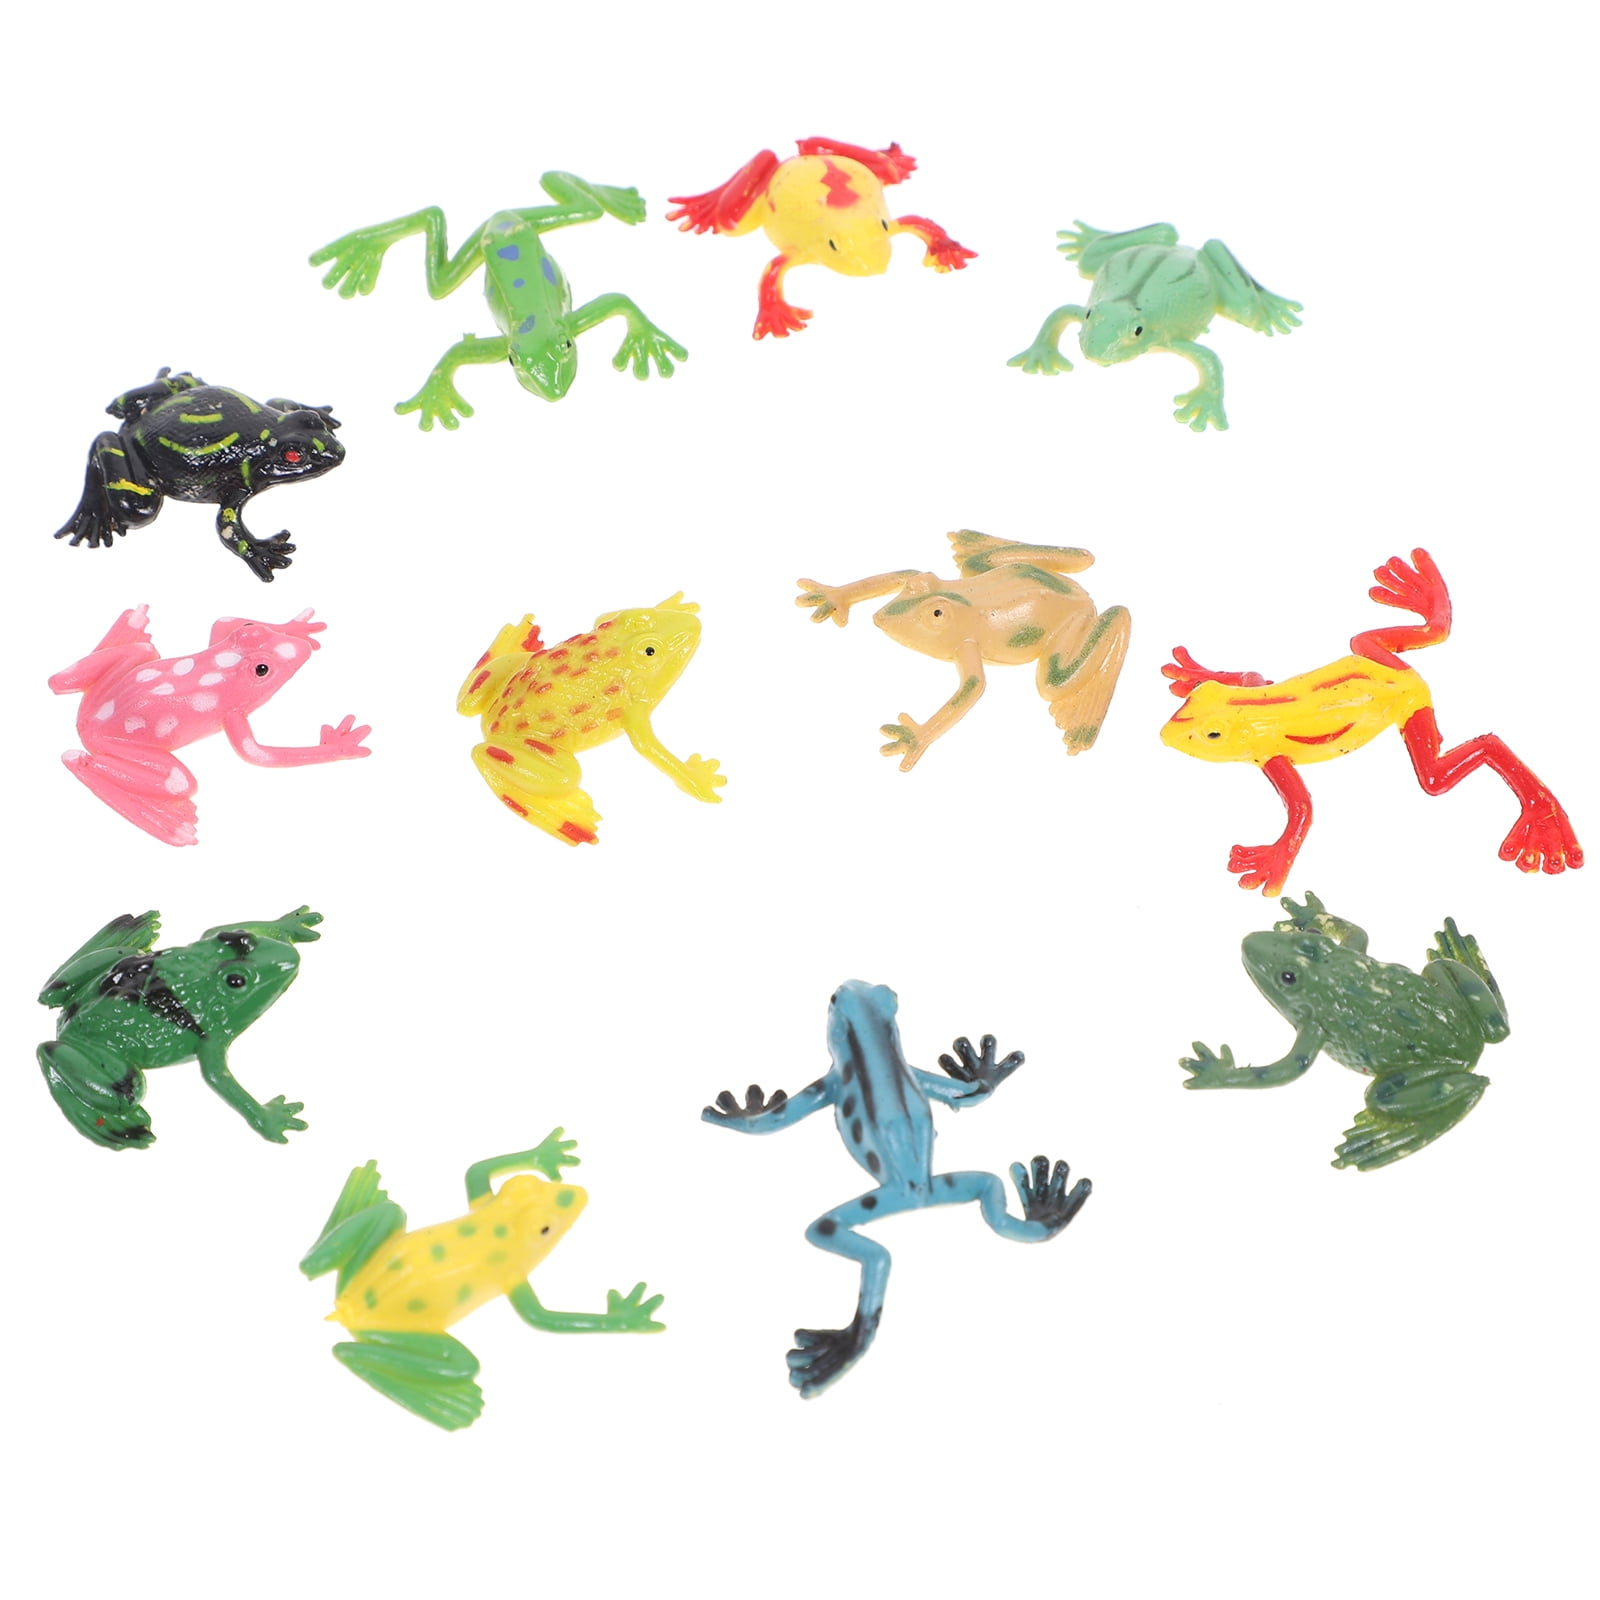 Plastic Small Frog Figures Simulation Decoration Kids Toy Colorful 12pcs  Gift